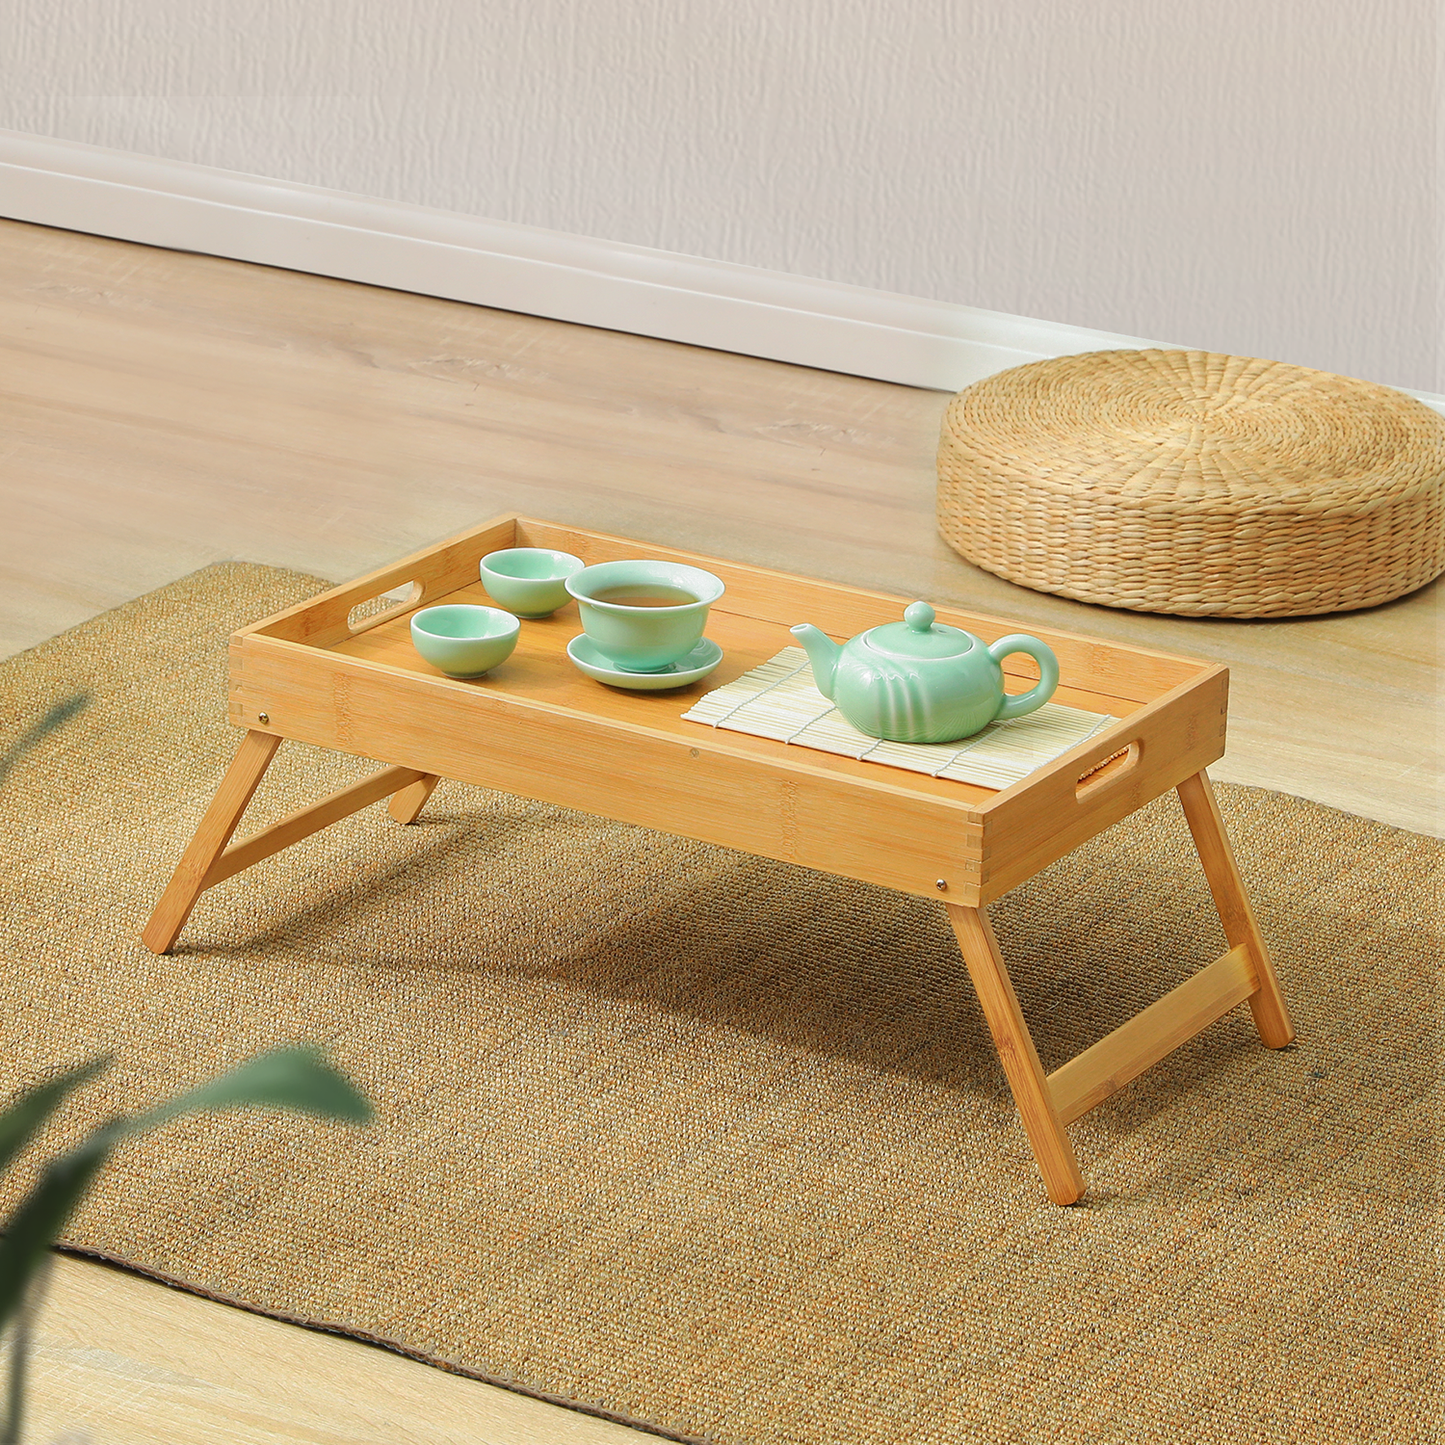 Foldable Breakfast Serving Tray Bed Table - Natural